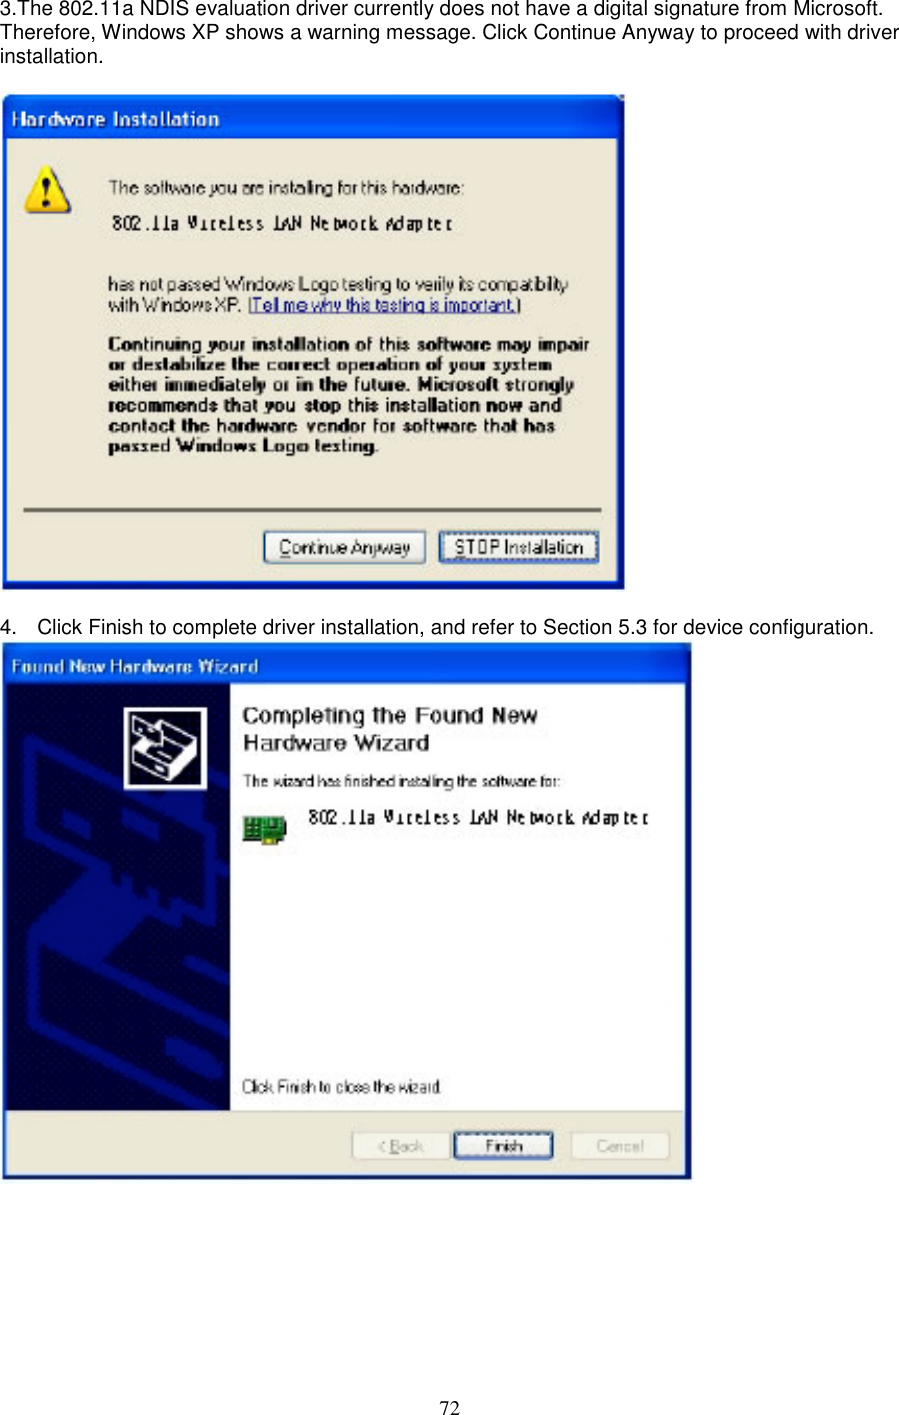 723.The 802.11a NDIS evaluation driver currently does not have a digital signature from Microsoft.Therefore, Windows XP shows a warning message. Click Continue Anyway to proceed with driverinstallation.4.  Click Finish to complete driver installation, and refer to Section 5.3 for device configuration.